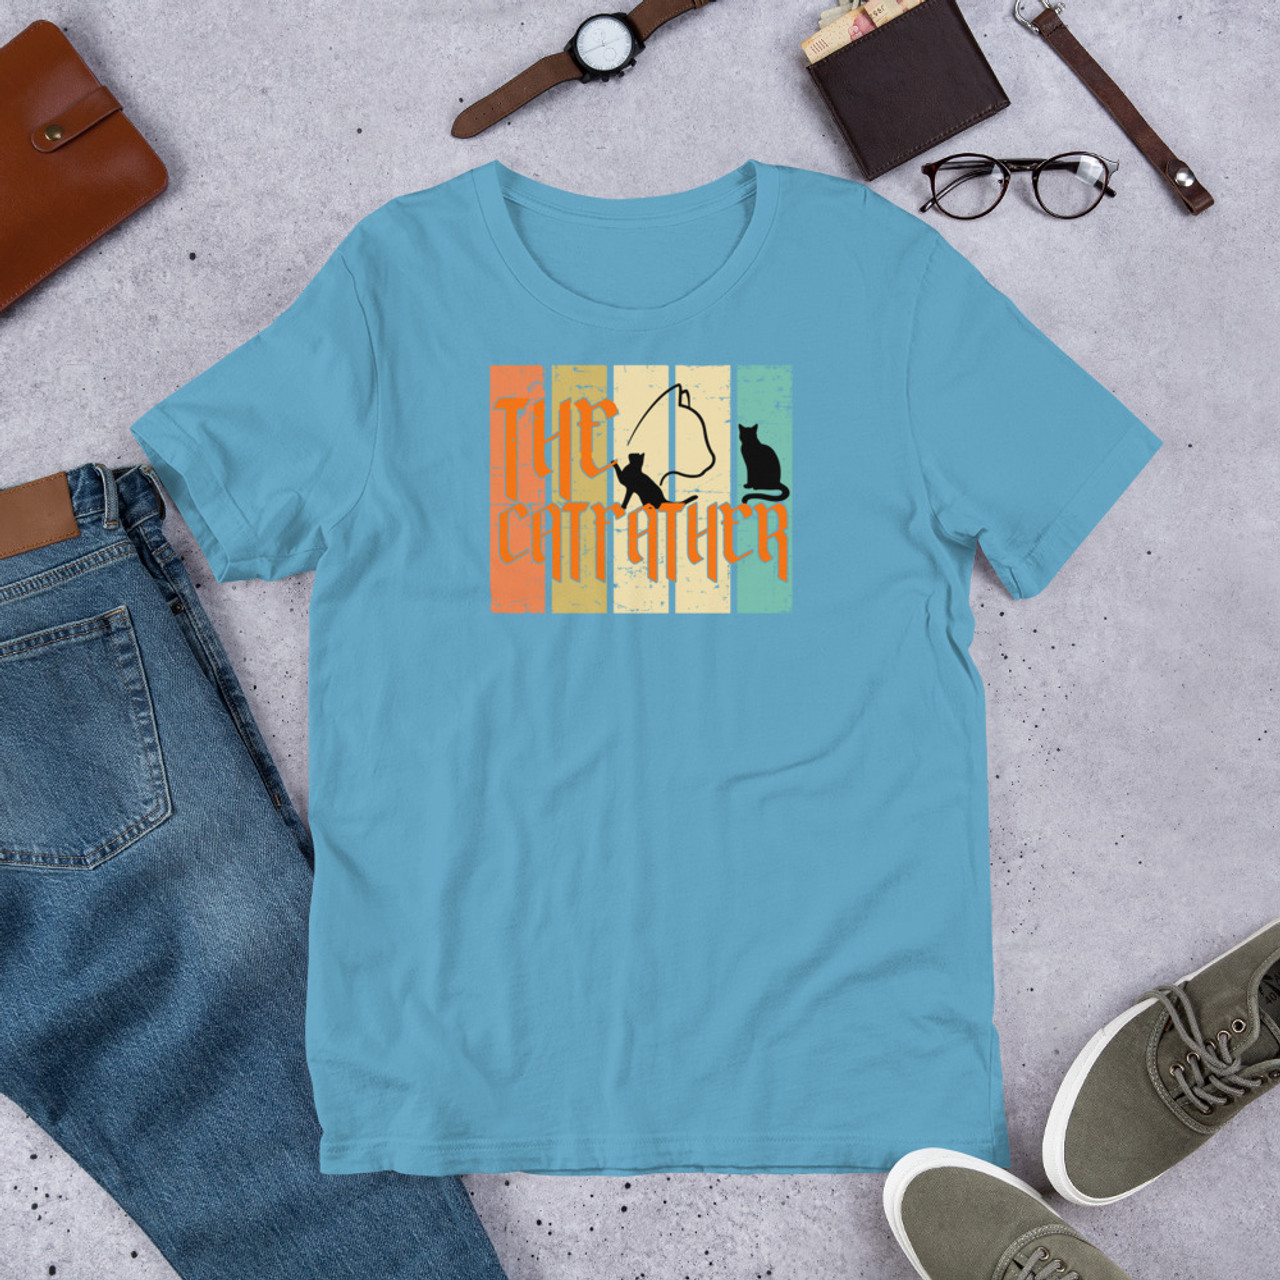 Ocean Blue T-Shirt - Bella + Canvas 3001 The Catfather